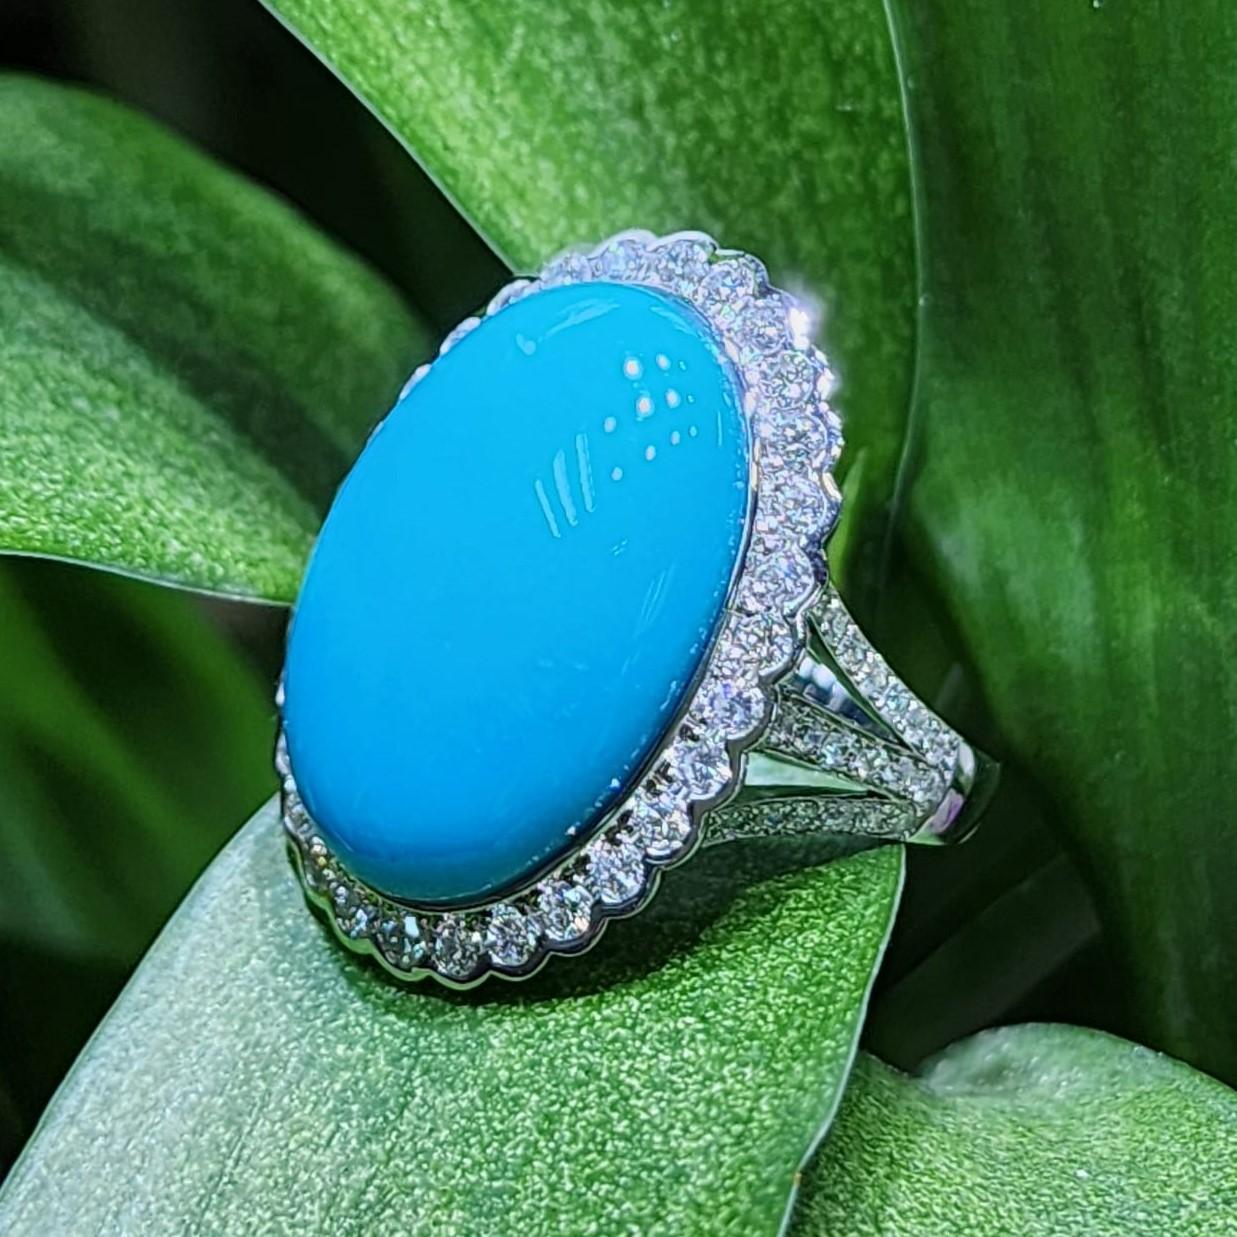 Oval Cut Vintage 11.64 Carat Sleeping Beauty Turquoise Diamond Ring in 14k White Gold For Sale